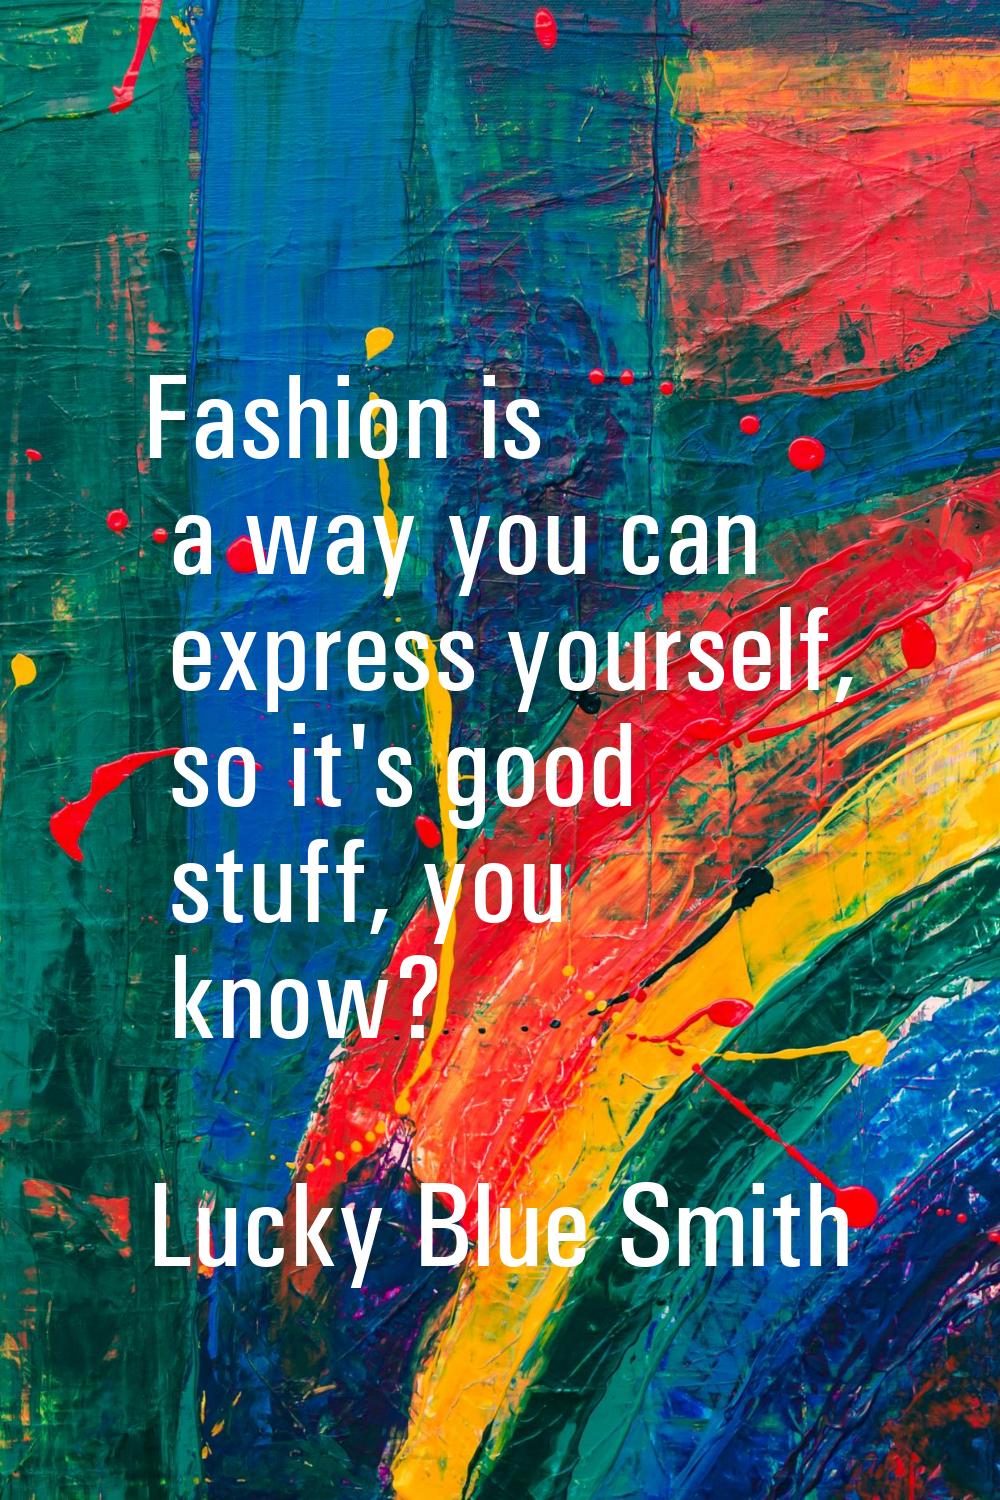 Fashion is a way you can express yourself, so it's good stuff, you know?